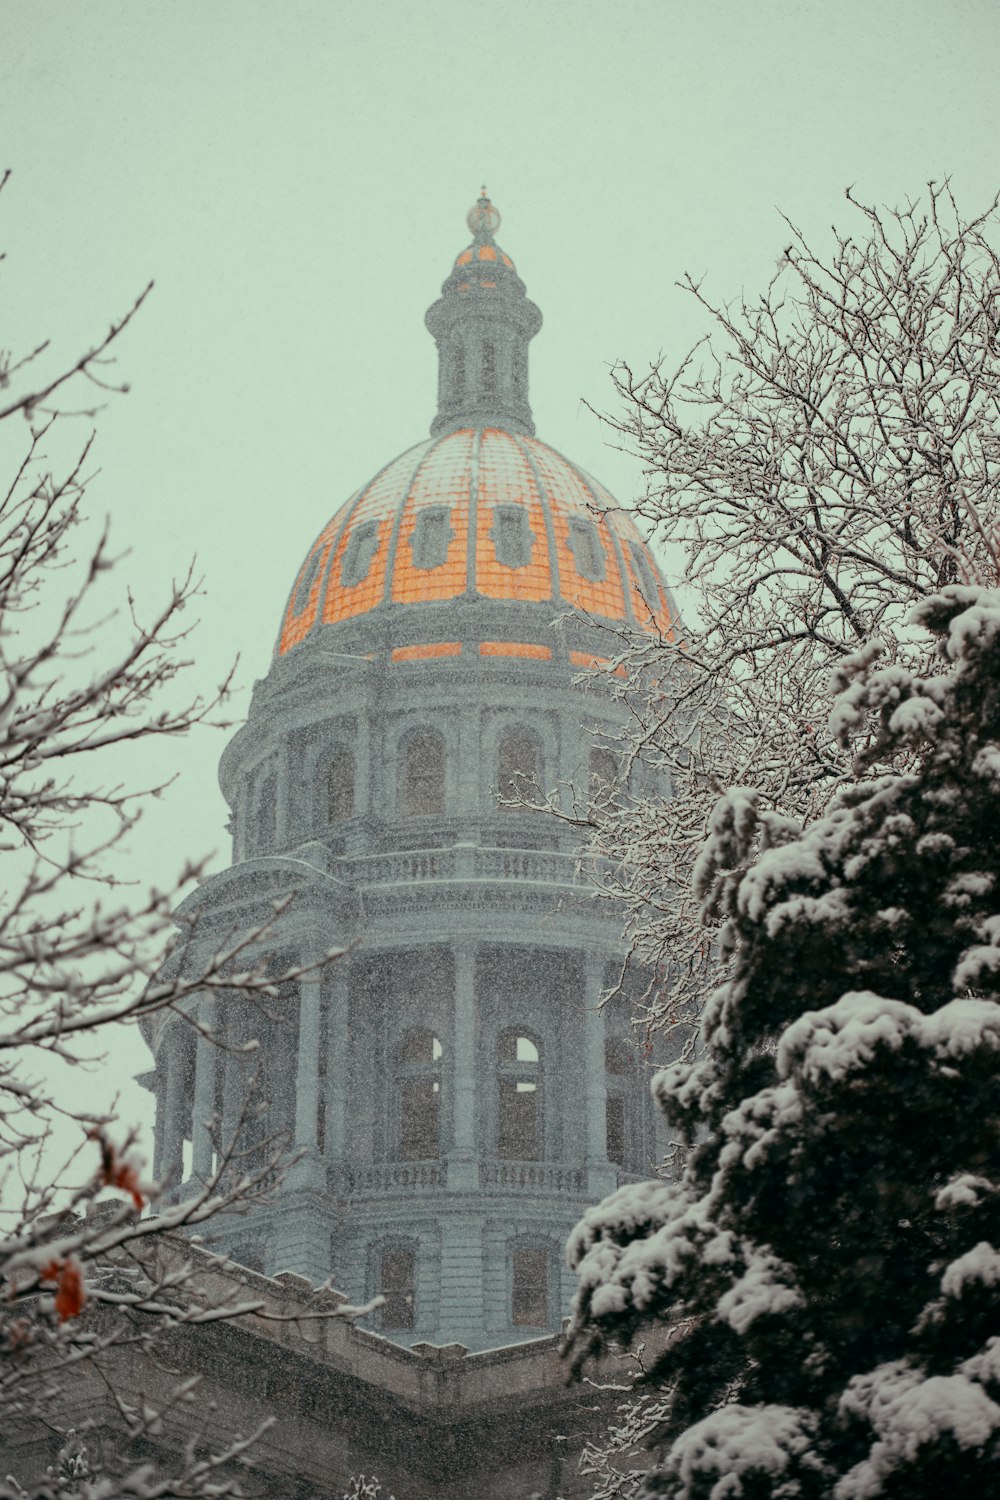 the dome of a building is covered in snow